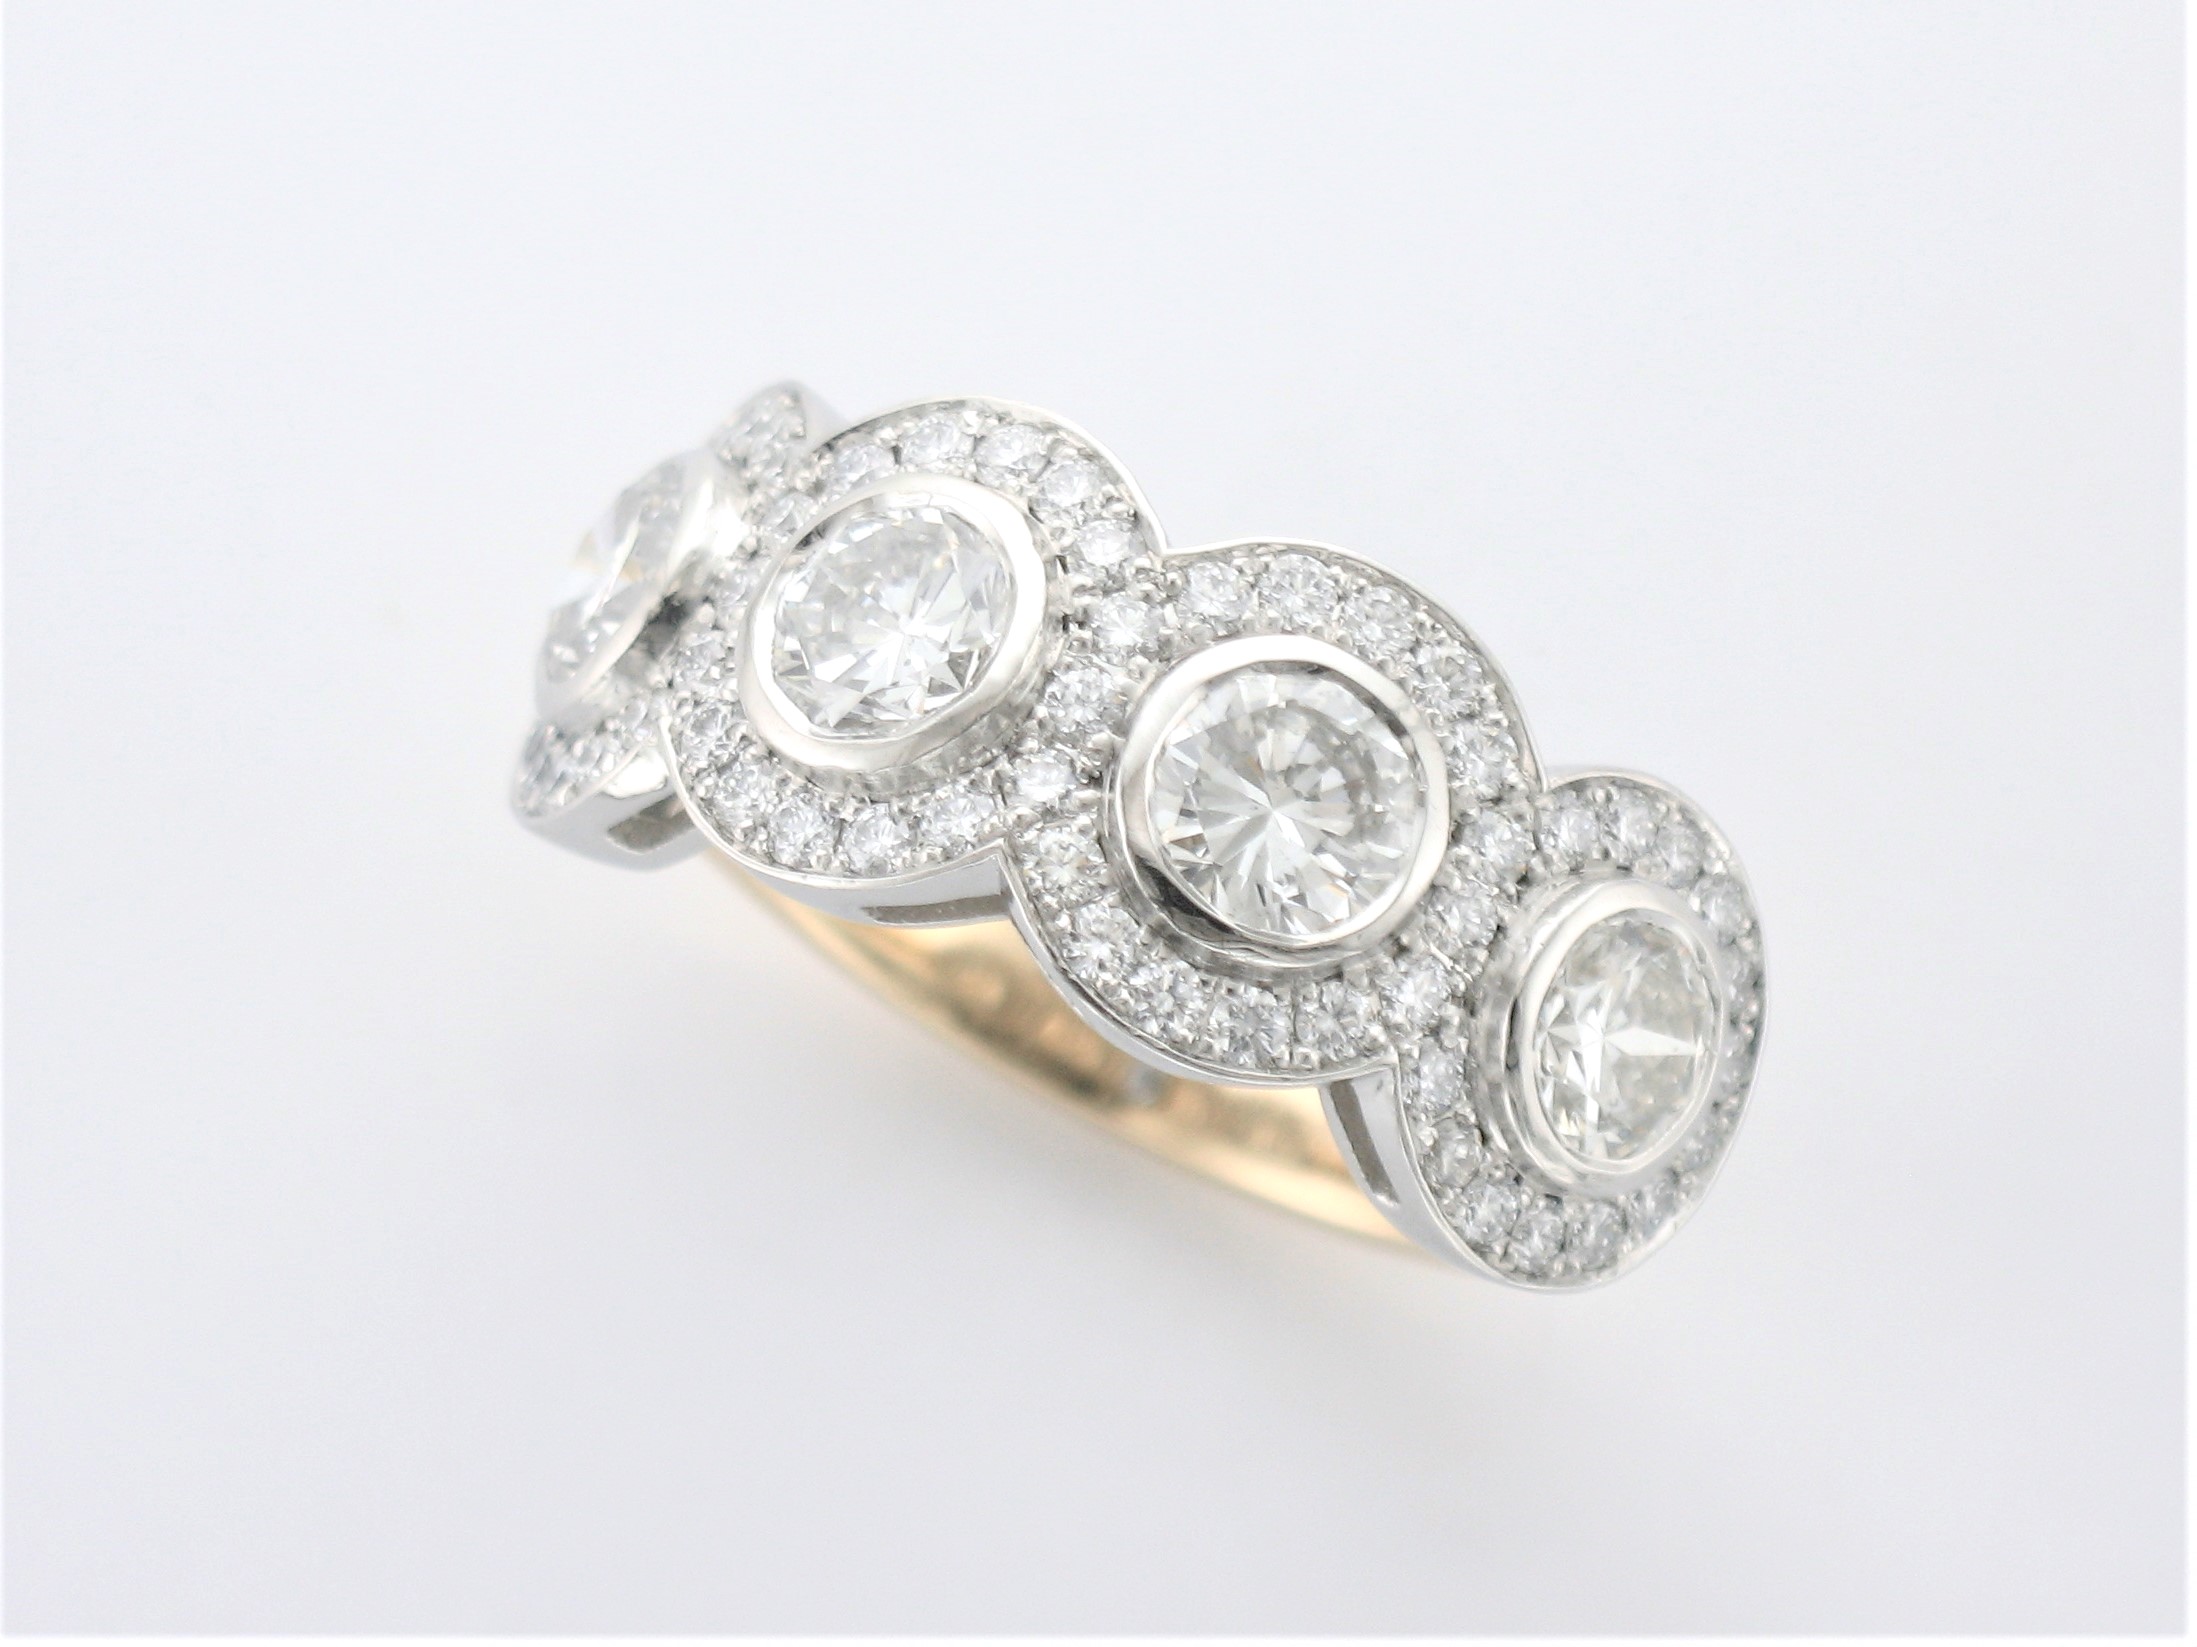 Dazzling Bespoke Diamond Ring designed using Brilliant Cut Diamonds from client's existing sentimental ring, with pave set halo detail added for that 'Wow Factor' by Pearl Perfect